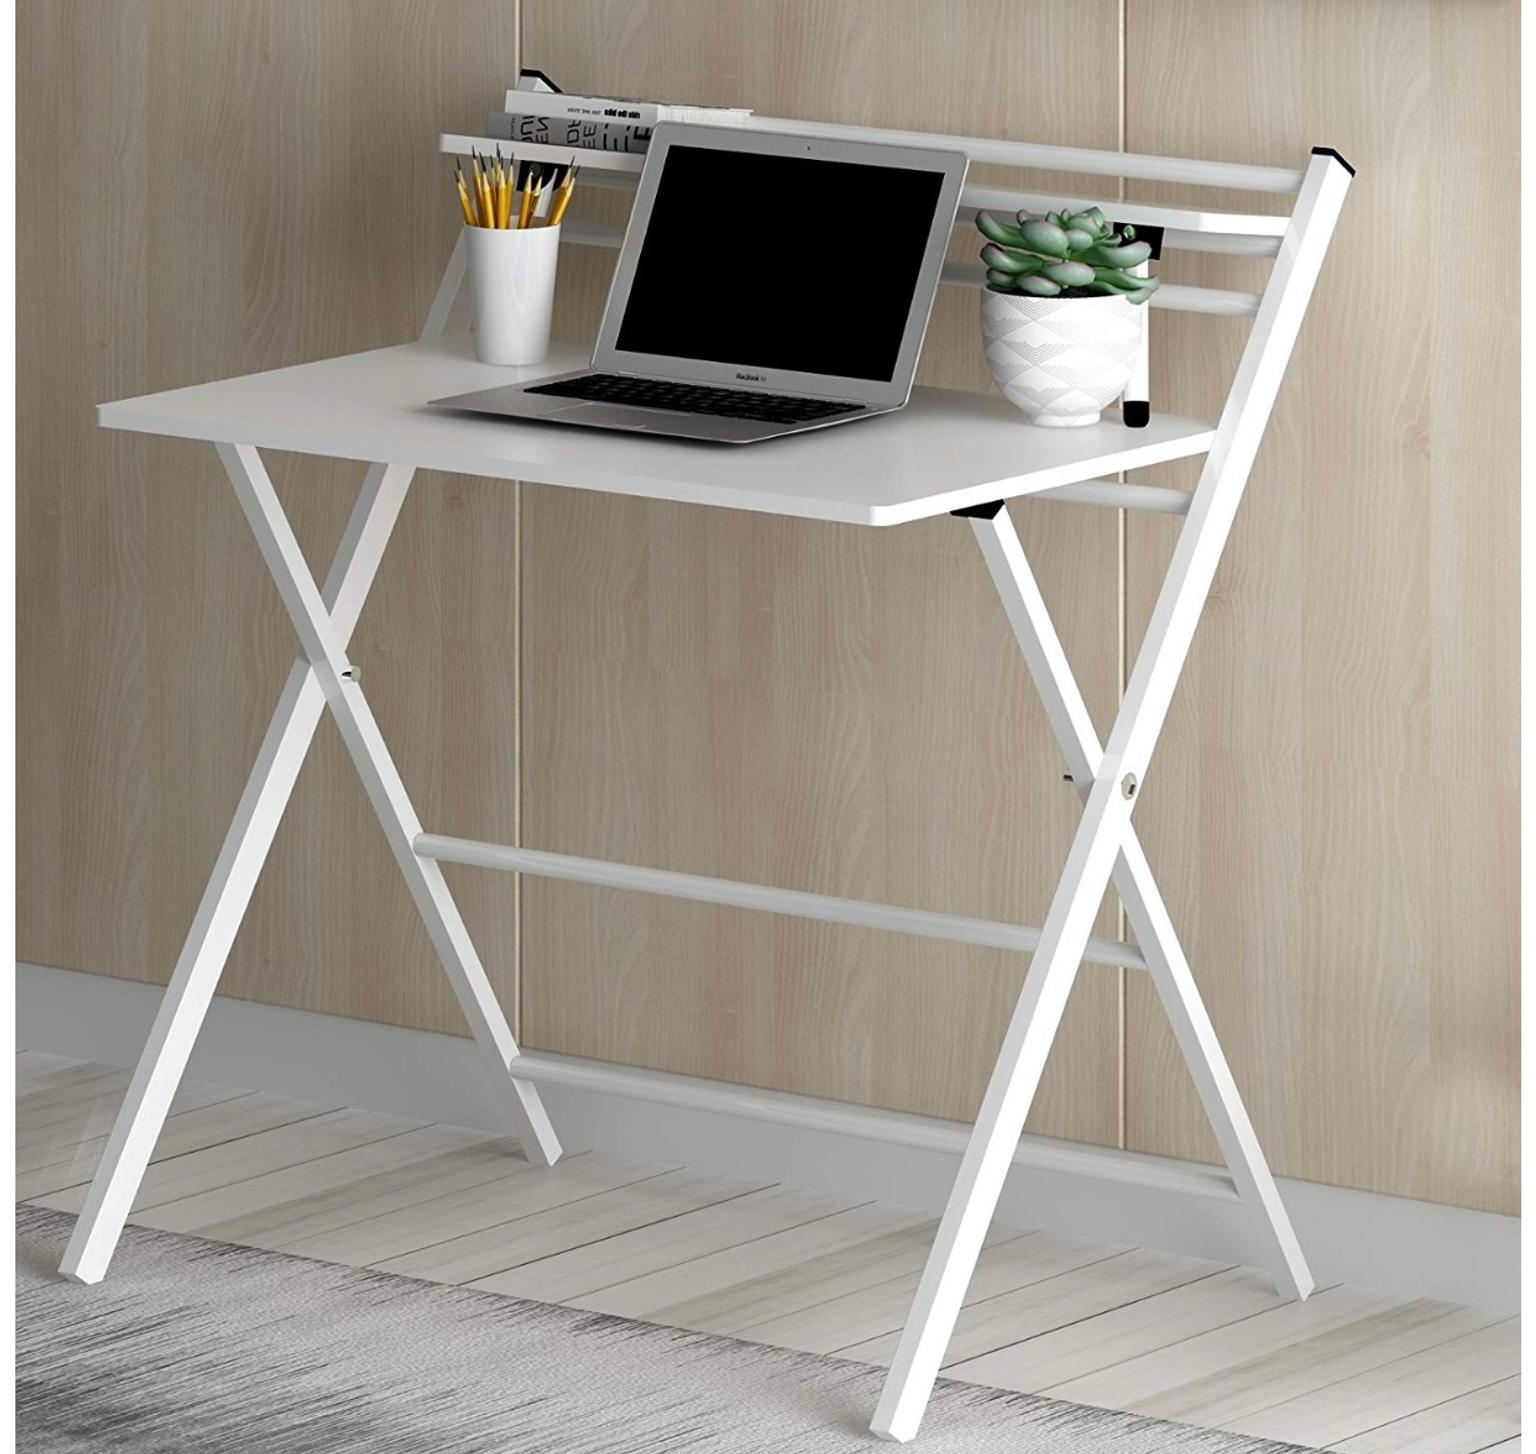 Unique Fold Away Desk for Small Space